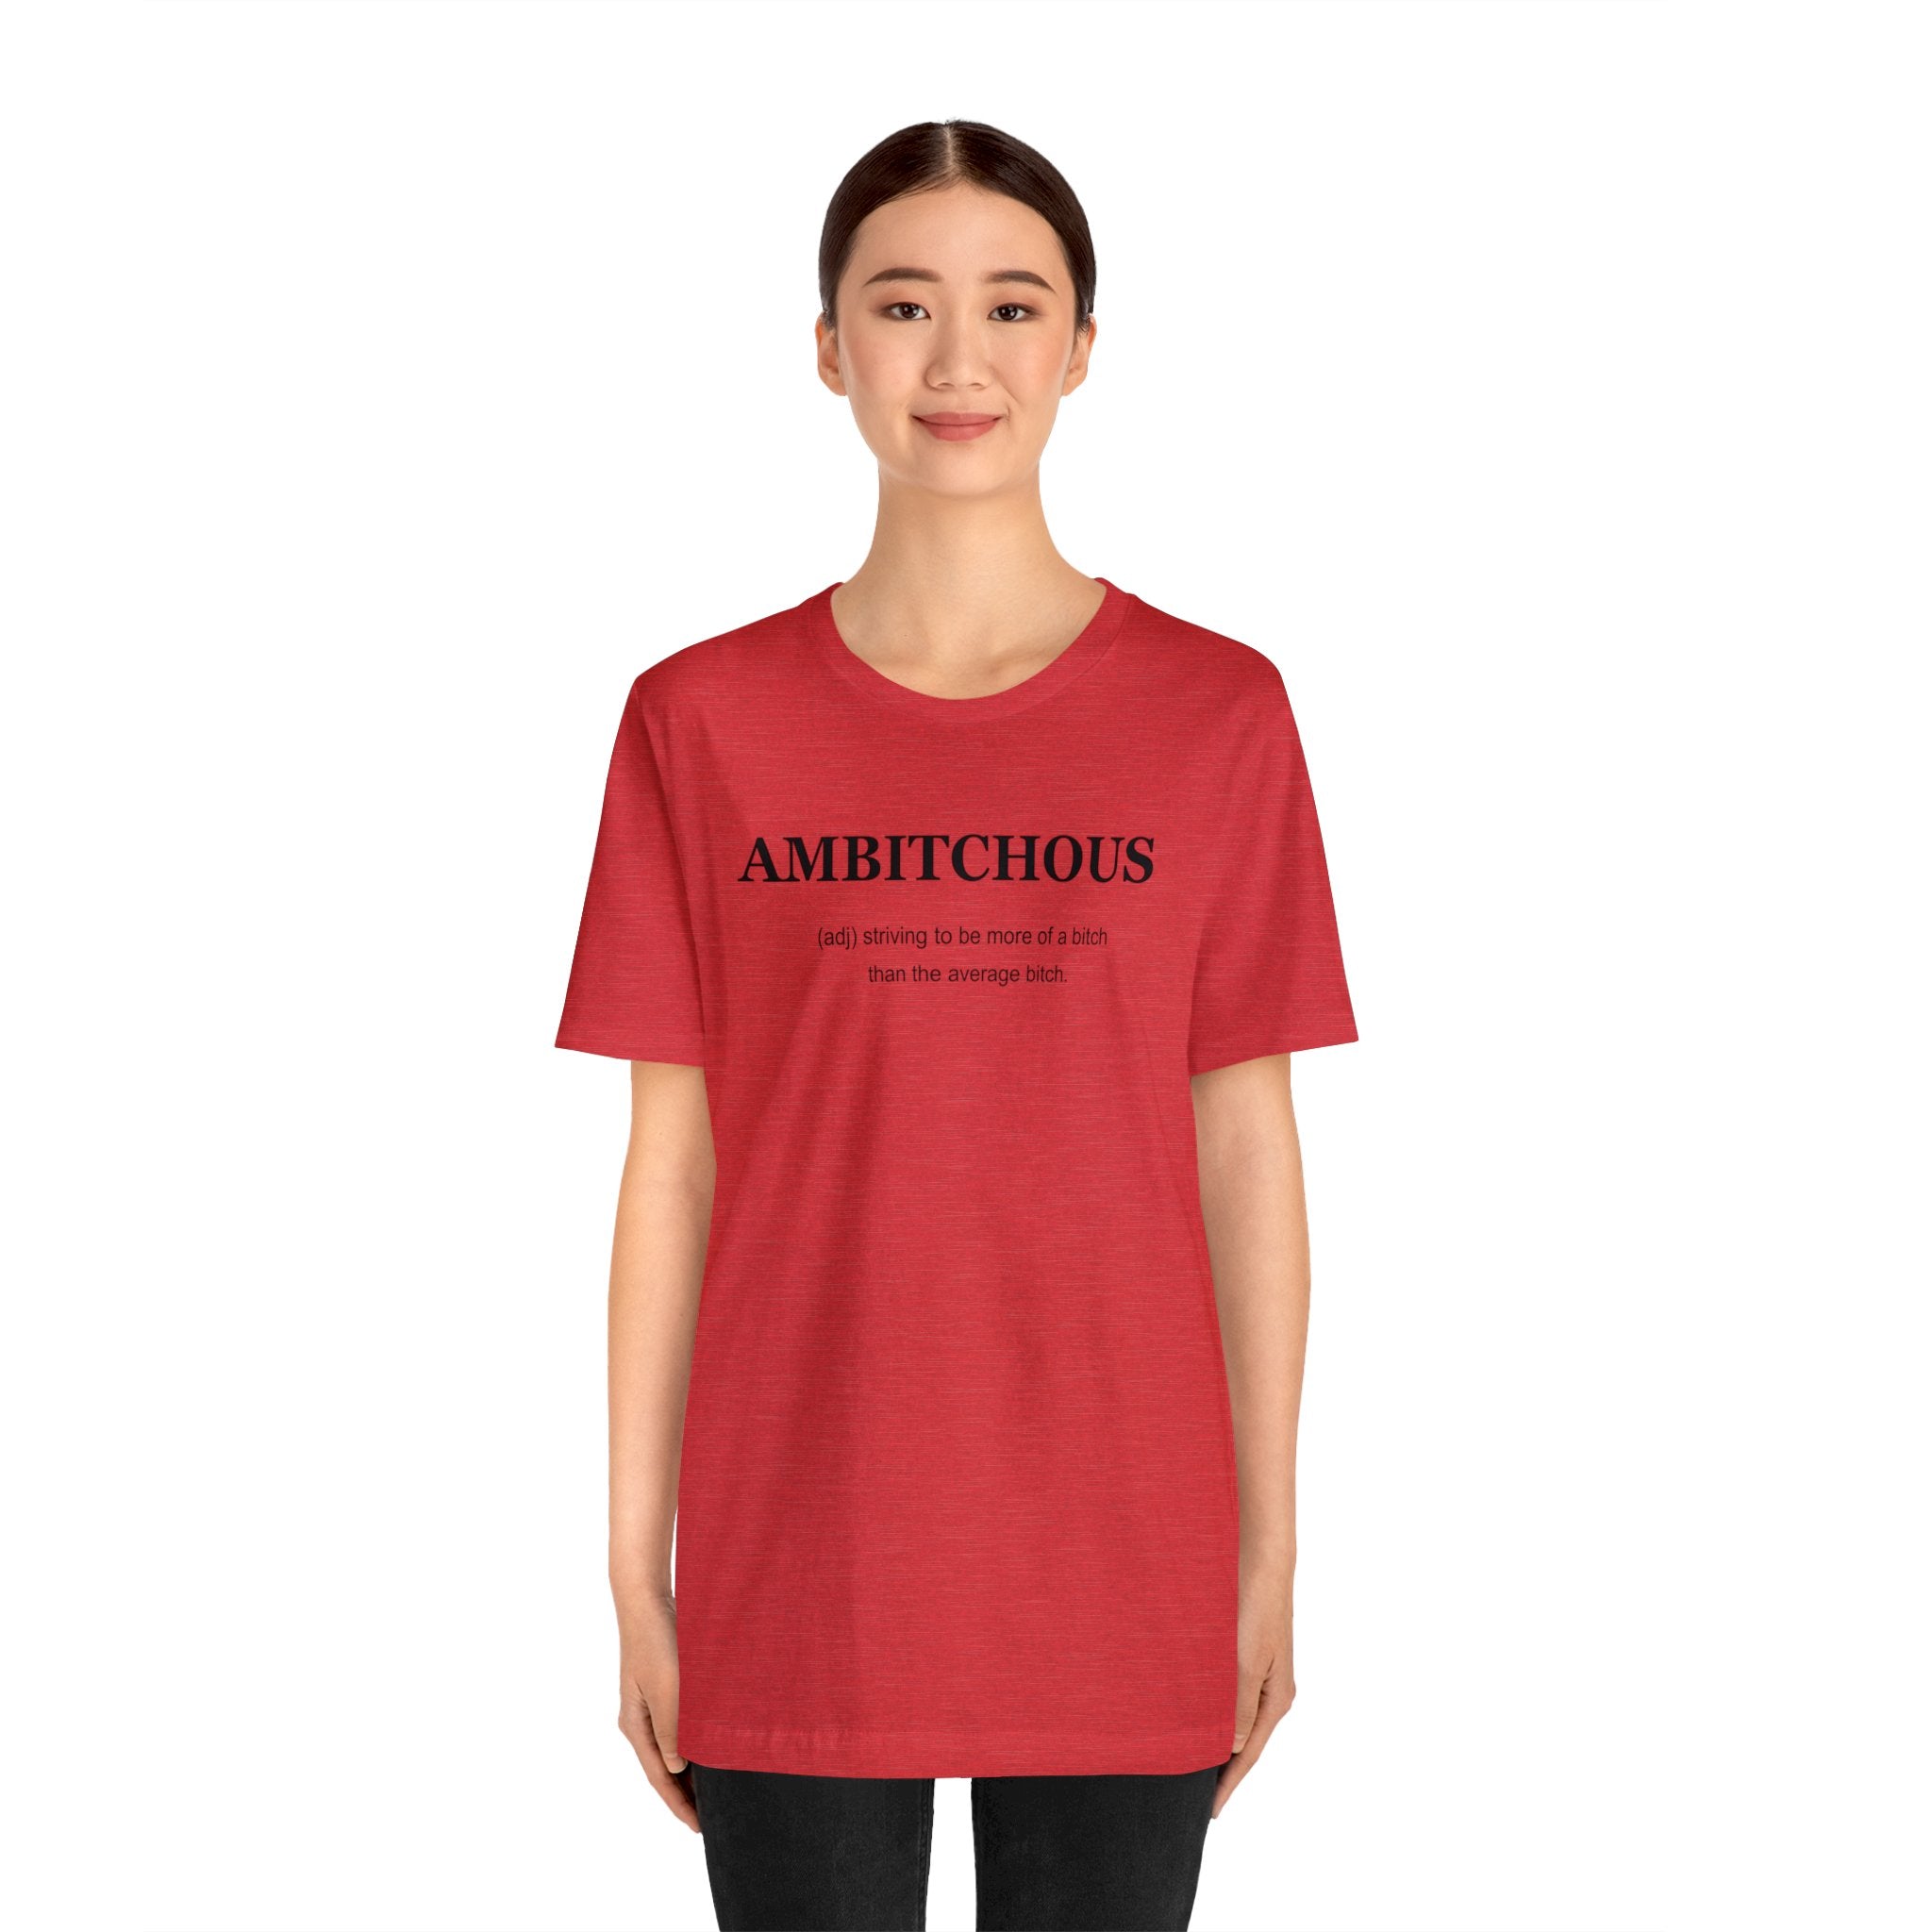 A woman wearing an empowering red Ambitchious T Shirt.